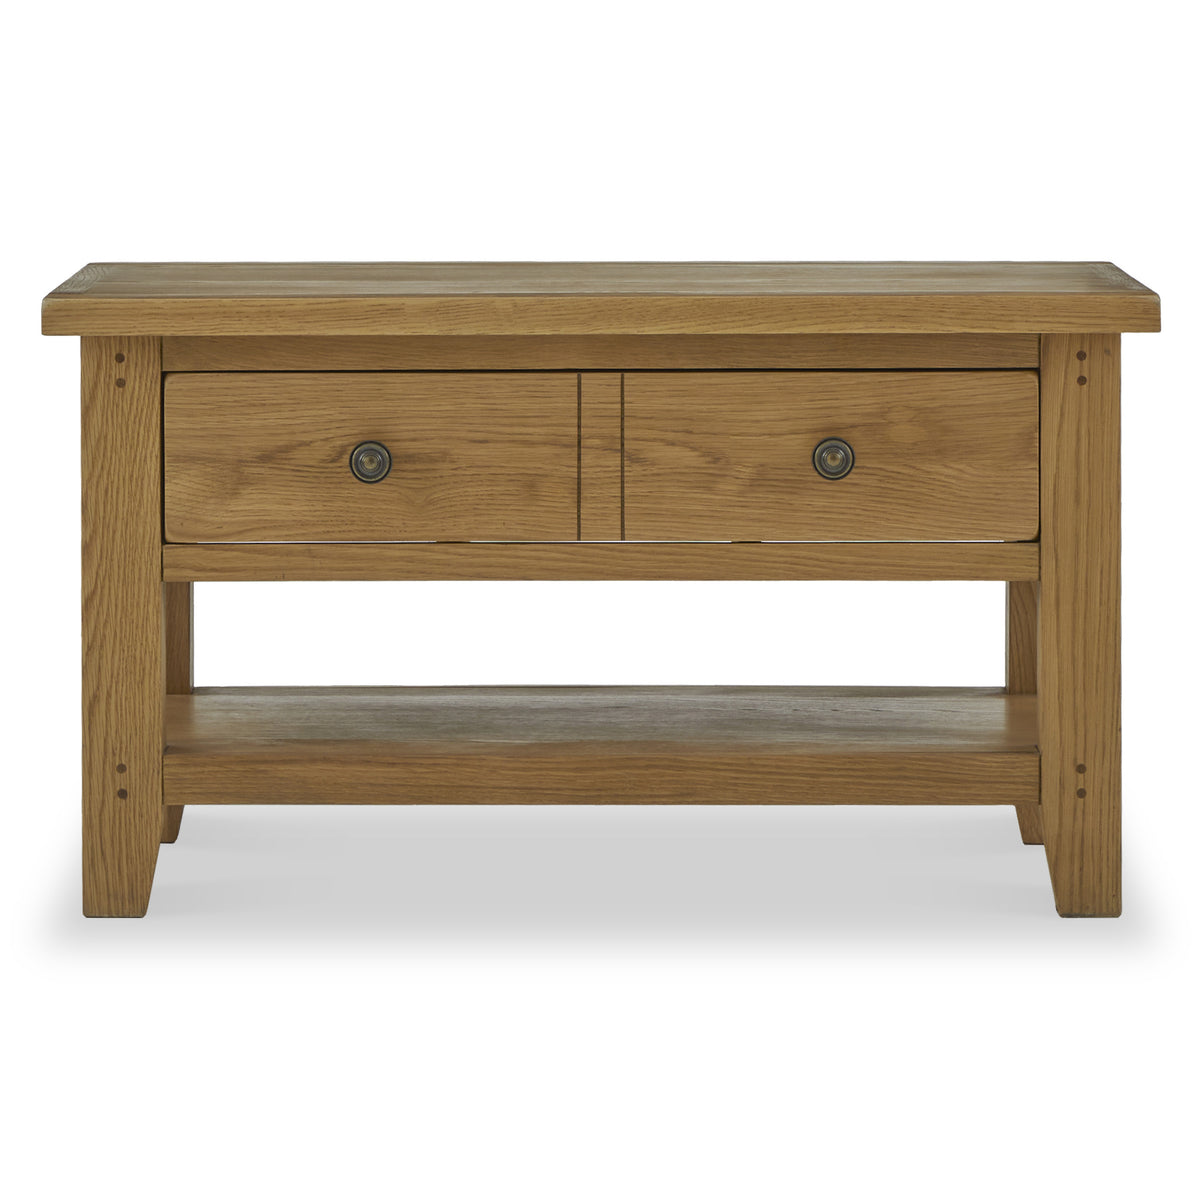 Broadway Oak Small Coffee Table with Storage drawers